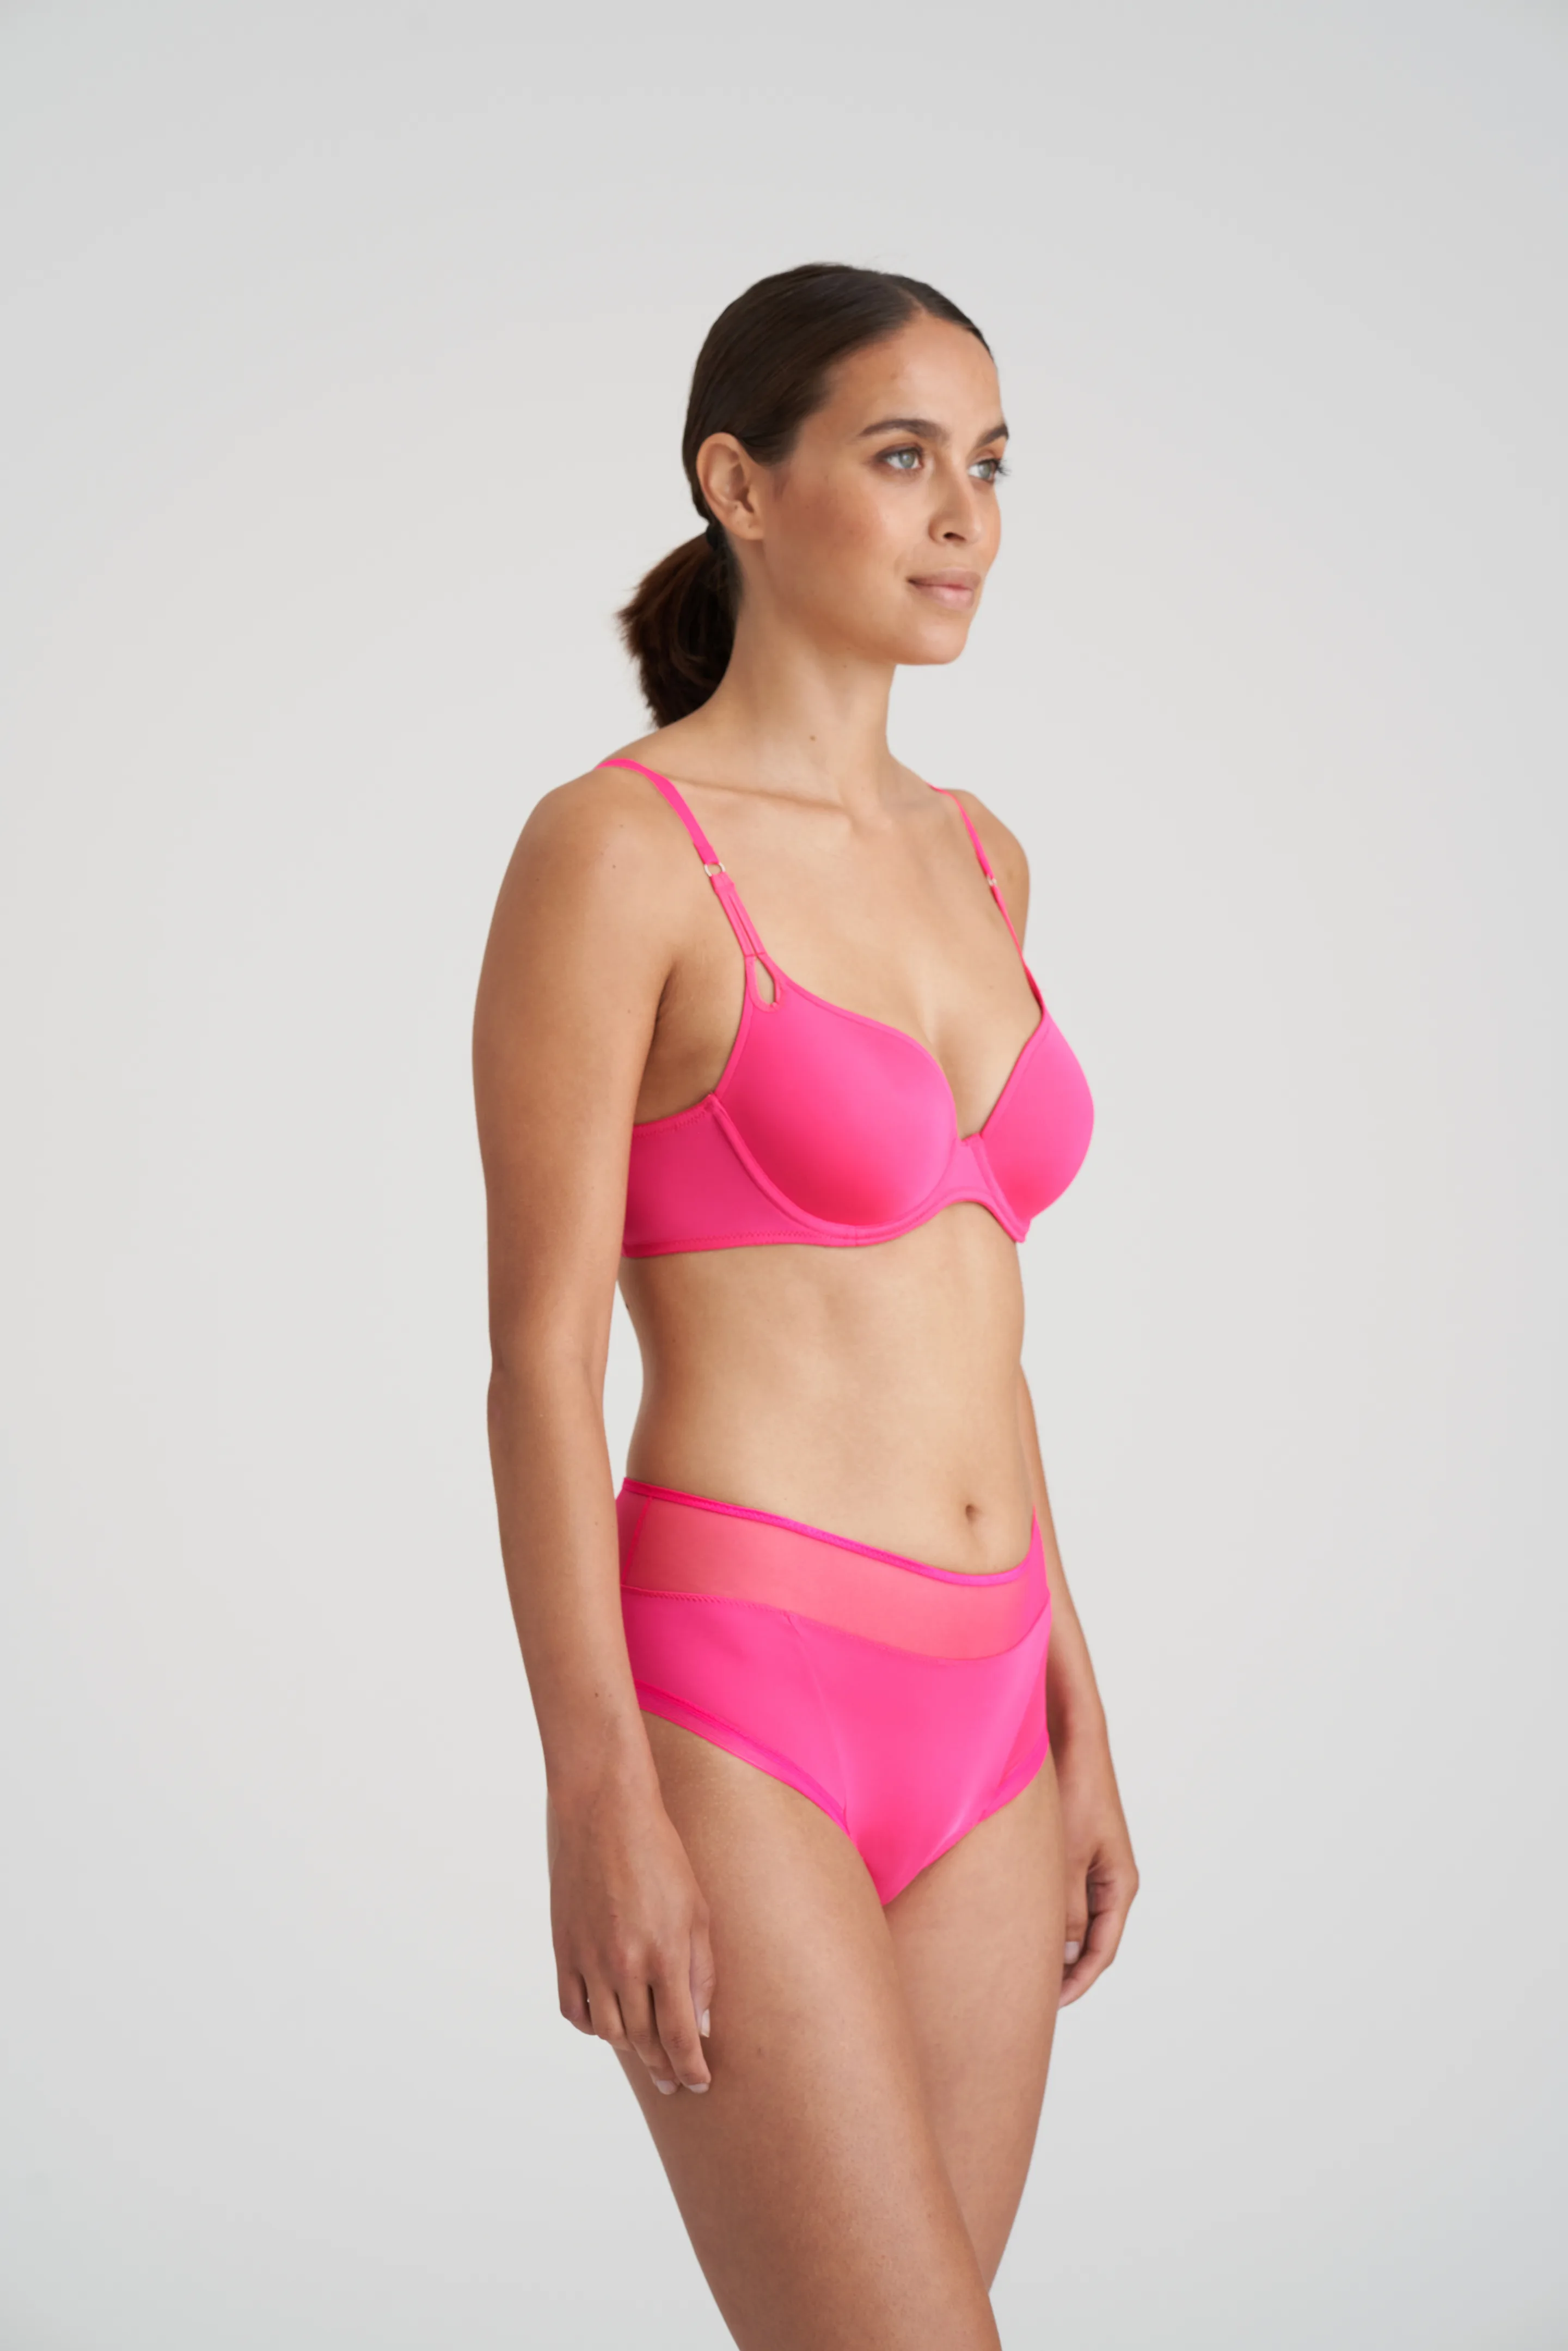 Bia Brazil Active Wear Padded Bra With Bubble Gum Pink From